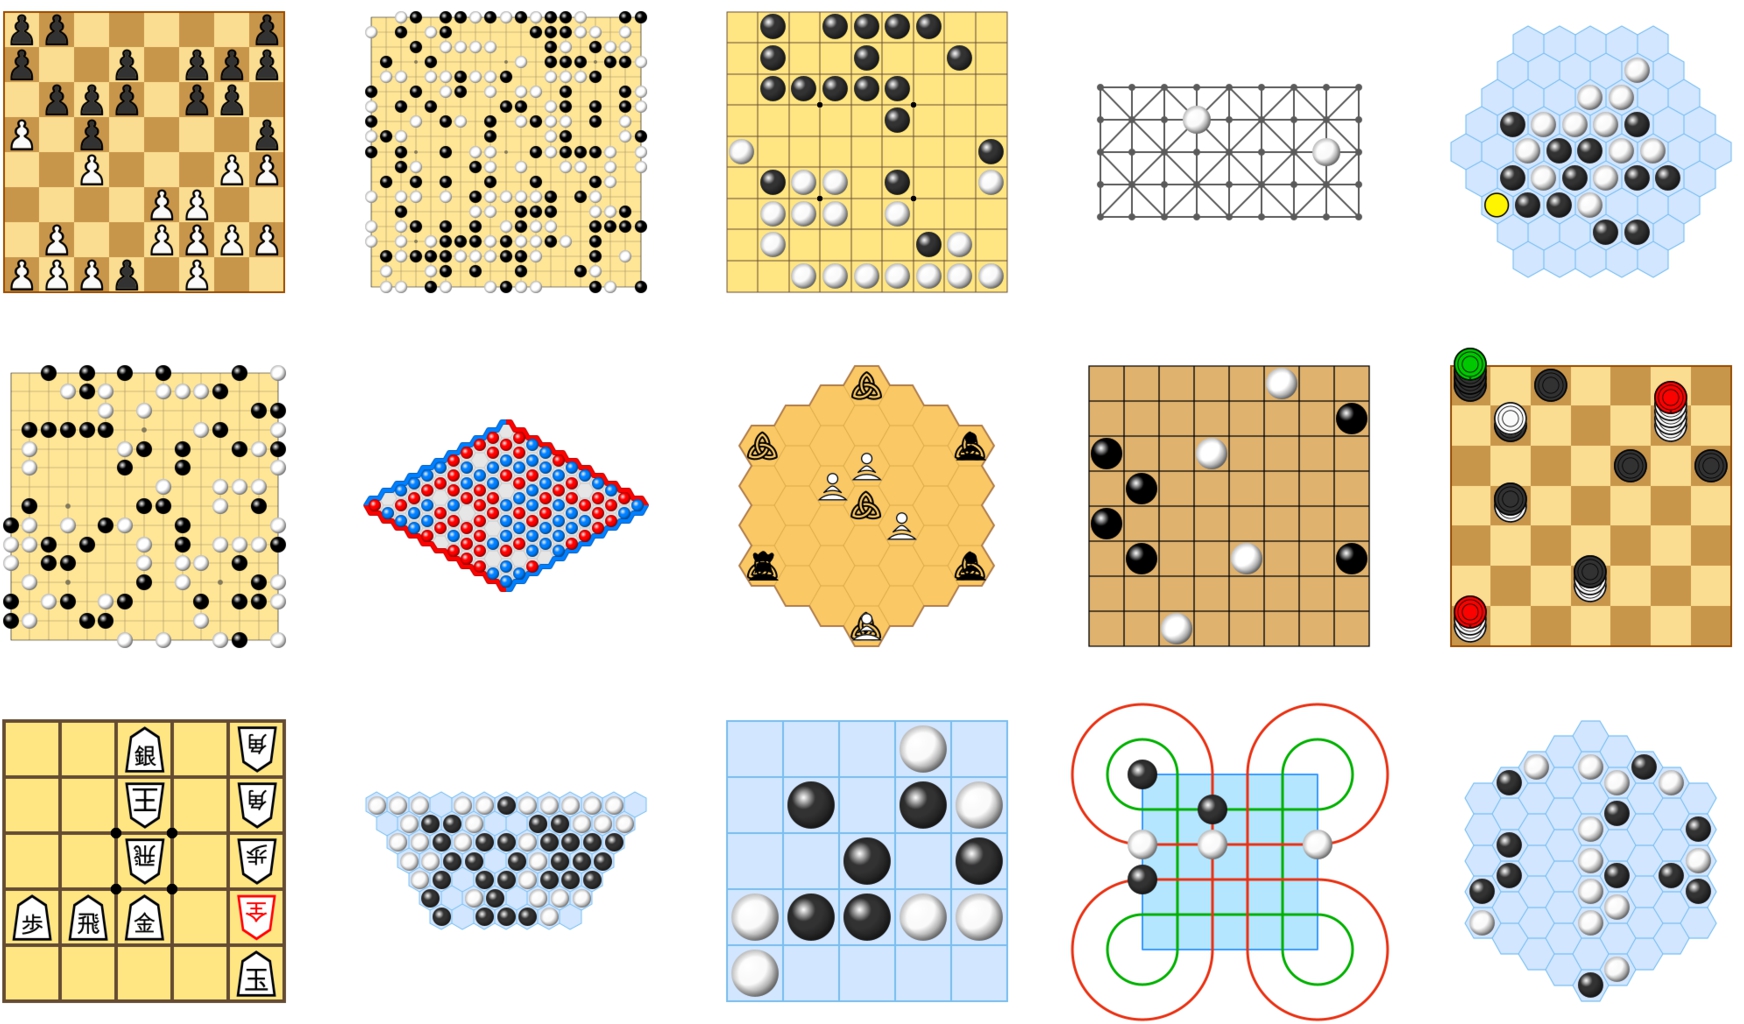 Training and Implementing AlphaZero to play Hex